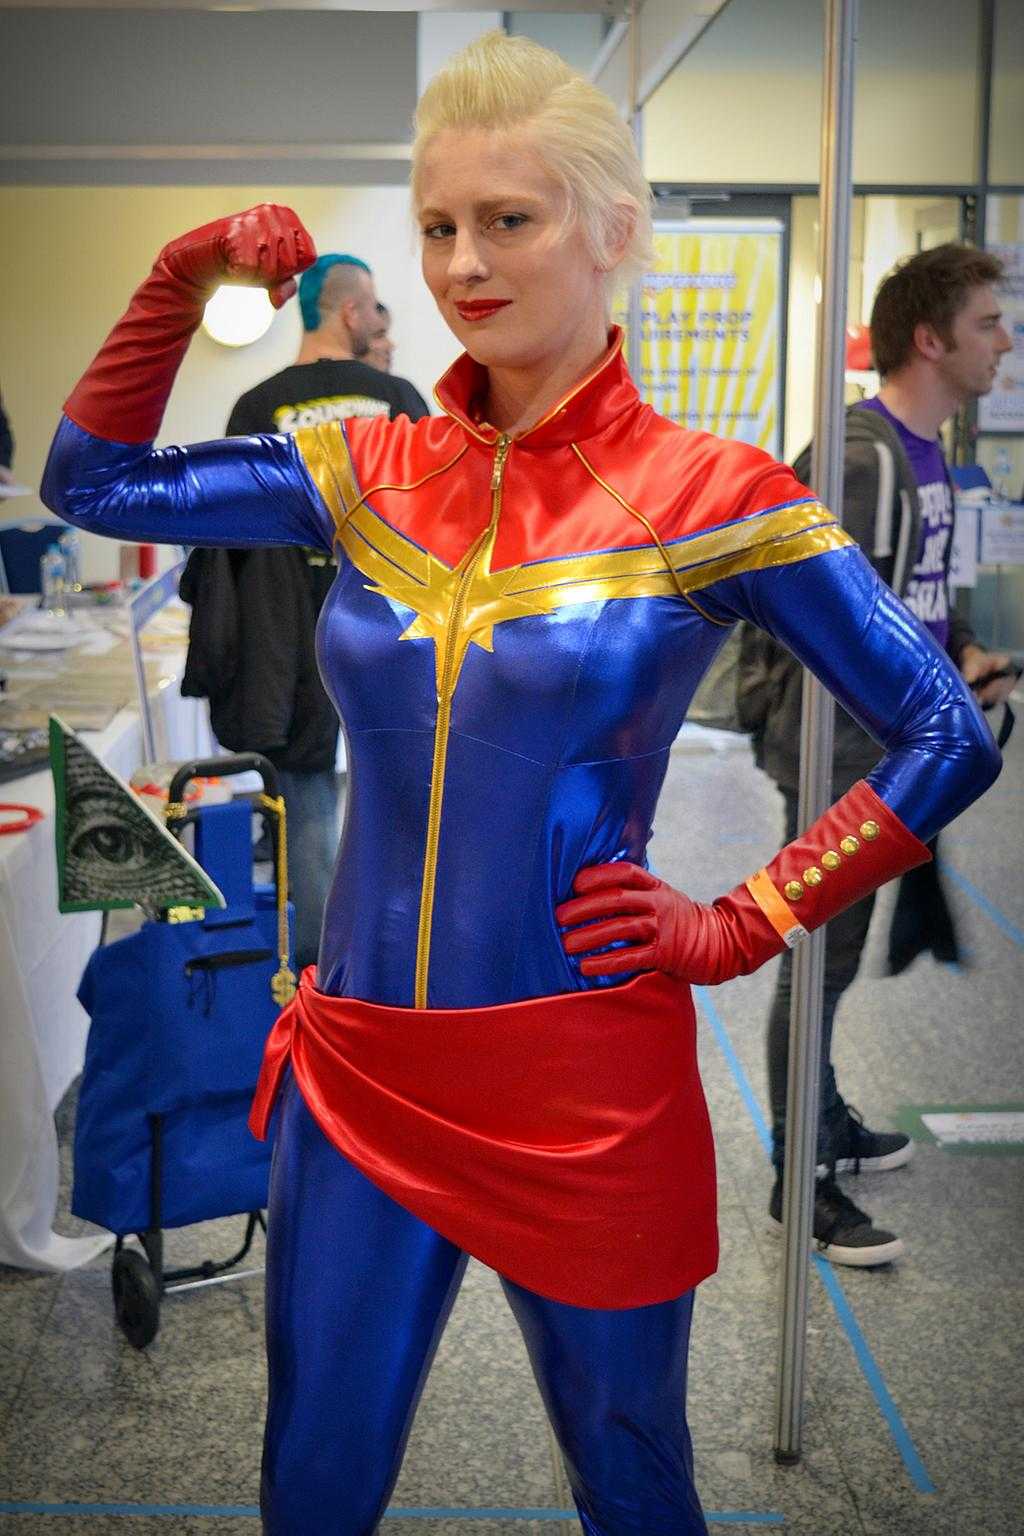 51 Sexy Captain Marvel Boobs Pictures Will Leave You Panting For Her Will Cause You To Ache For 